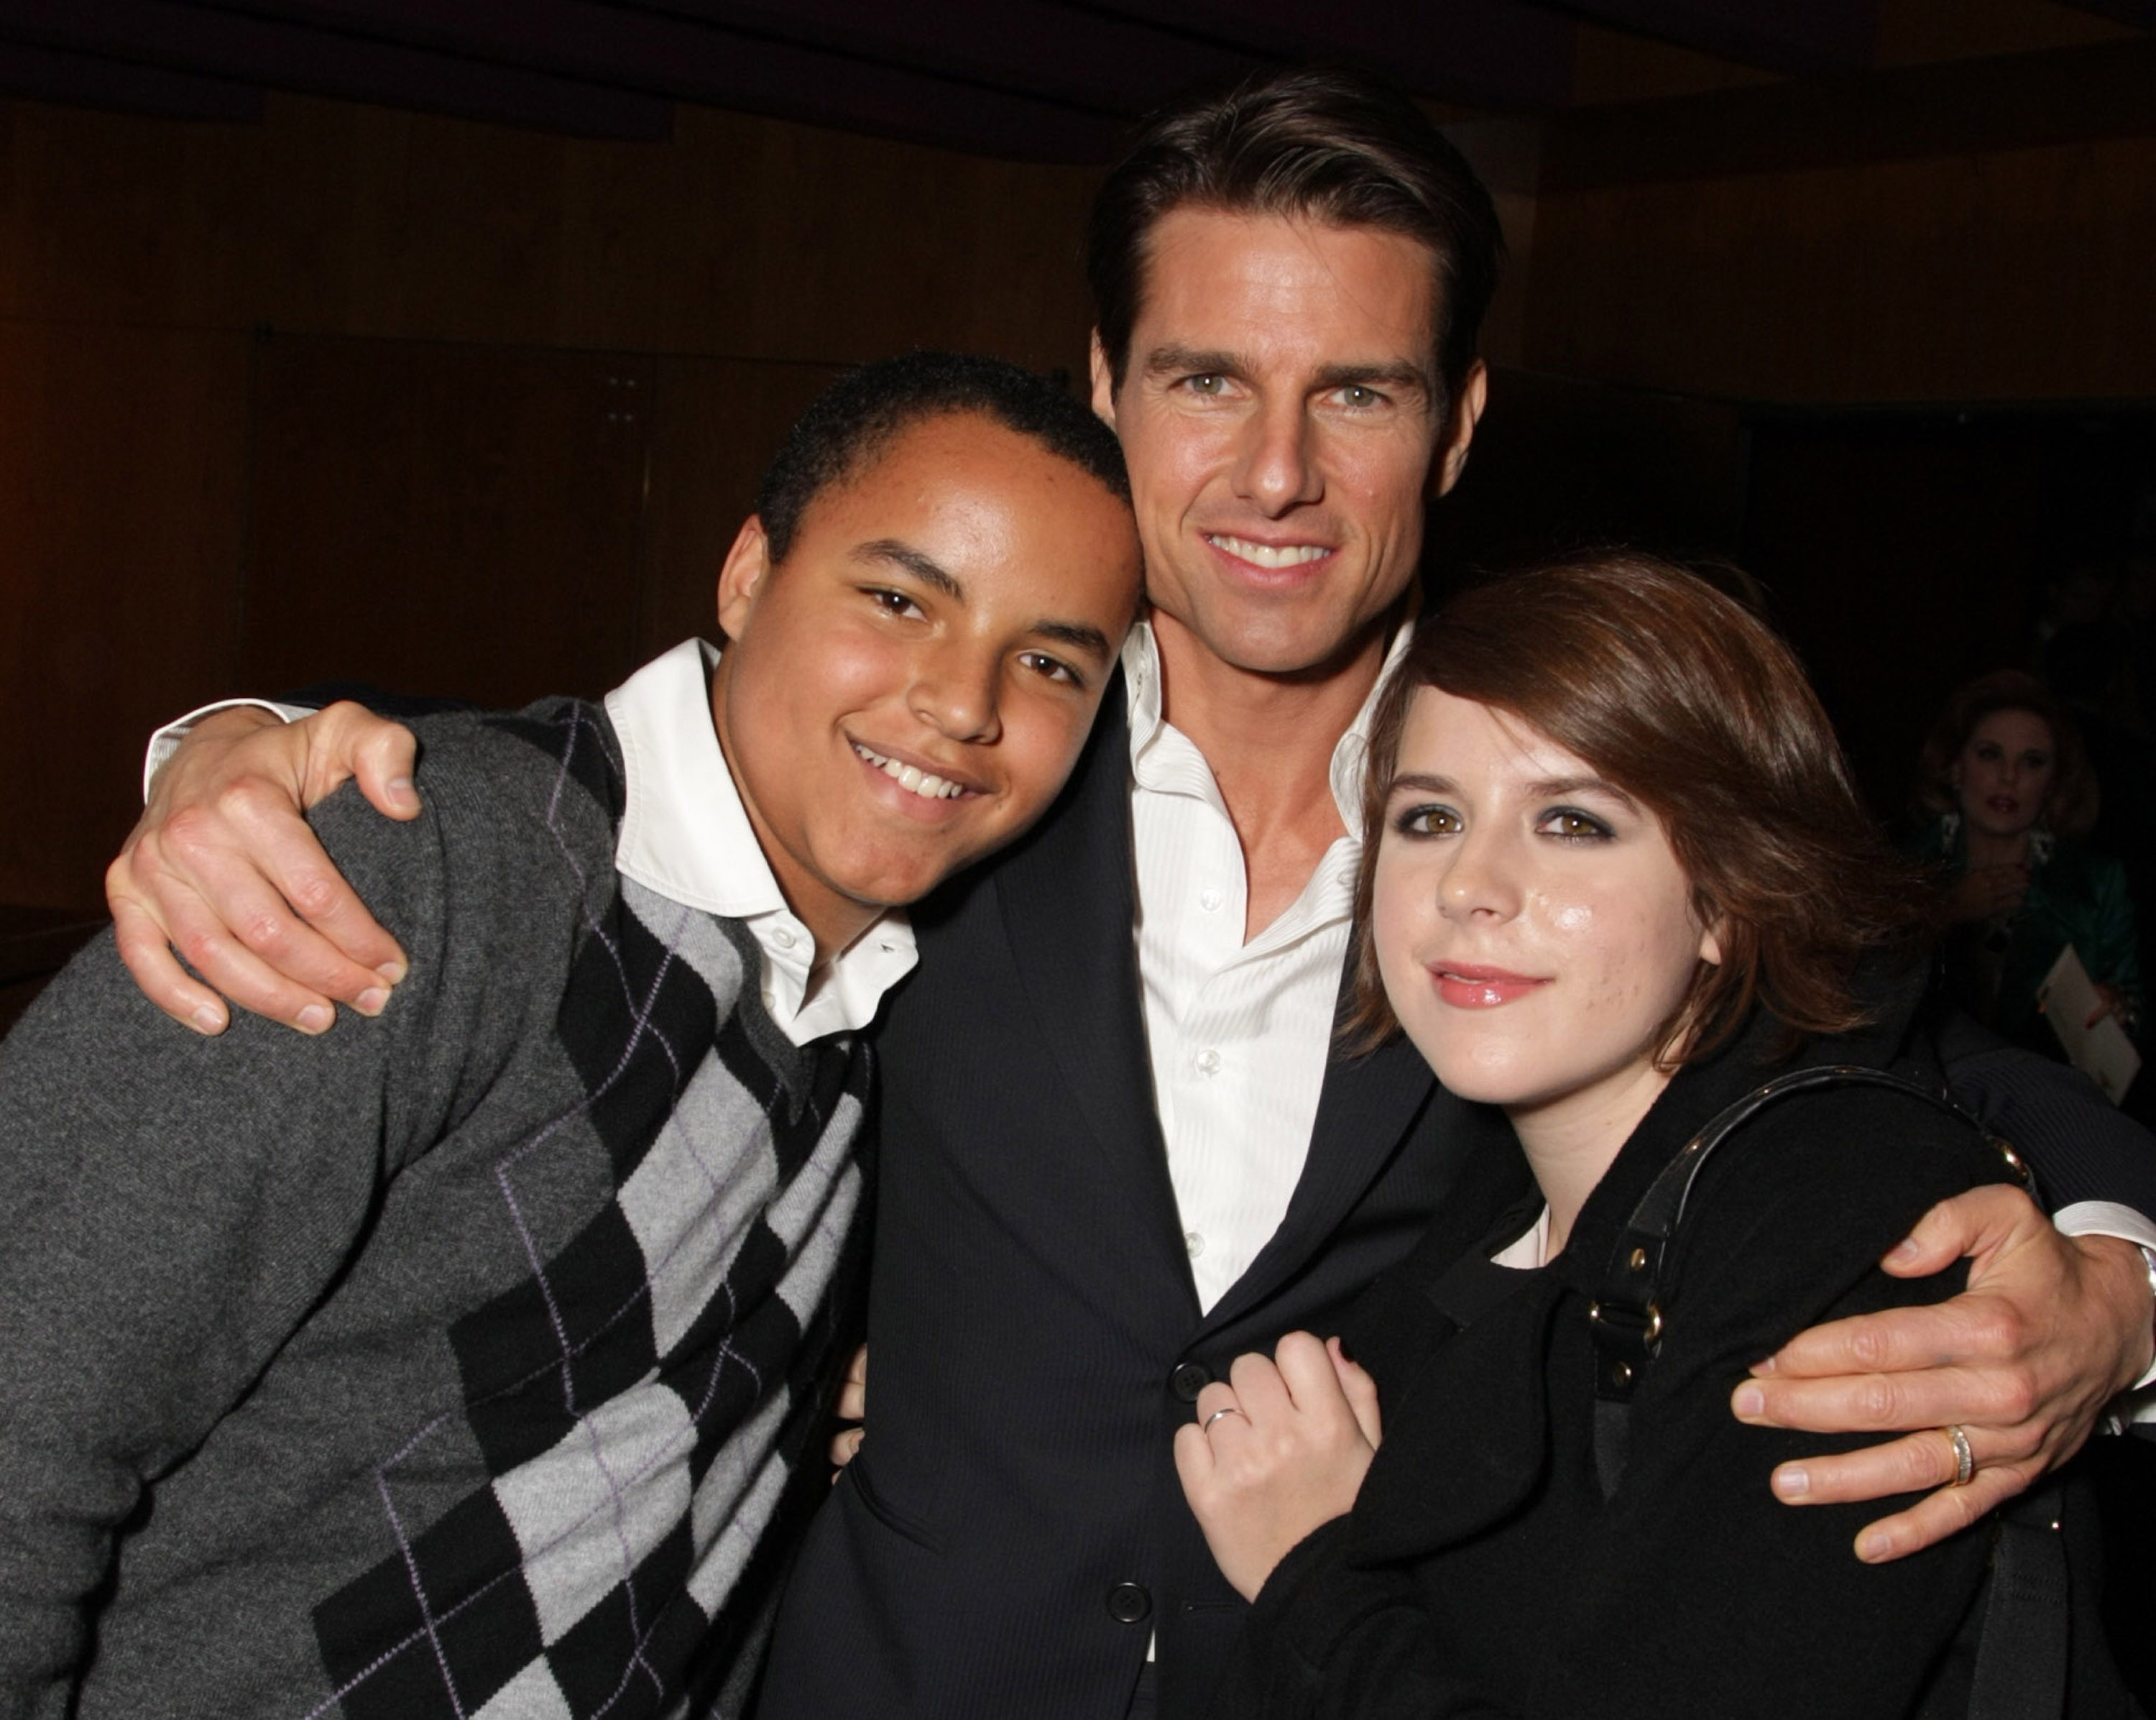 Connor Cruise, Tom Cruise, and Isabella Cruise at United Artists Pictures and MGM premiere of 'Valkyrie' in Los Angeles, California, on December 18, 2008. | Source: Getty Images